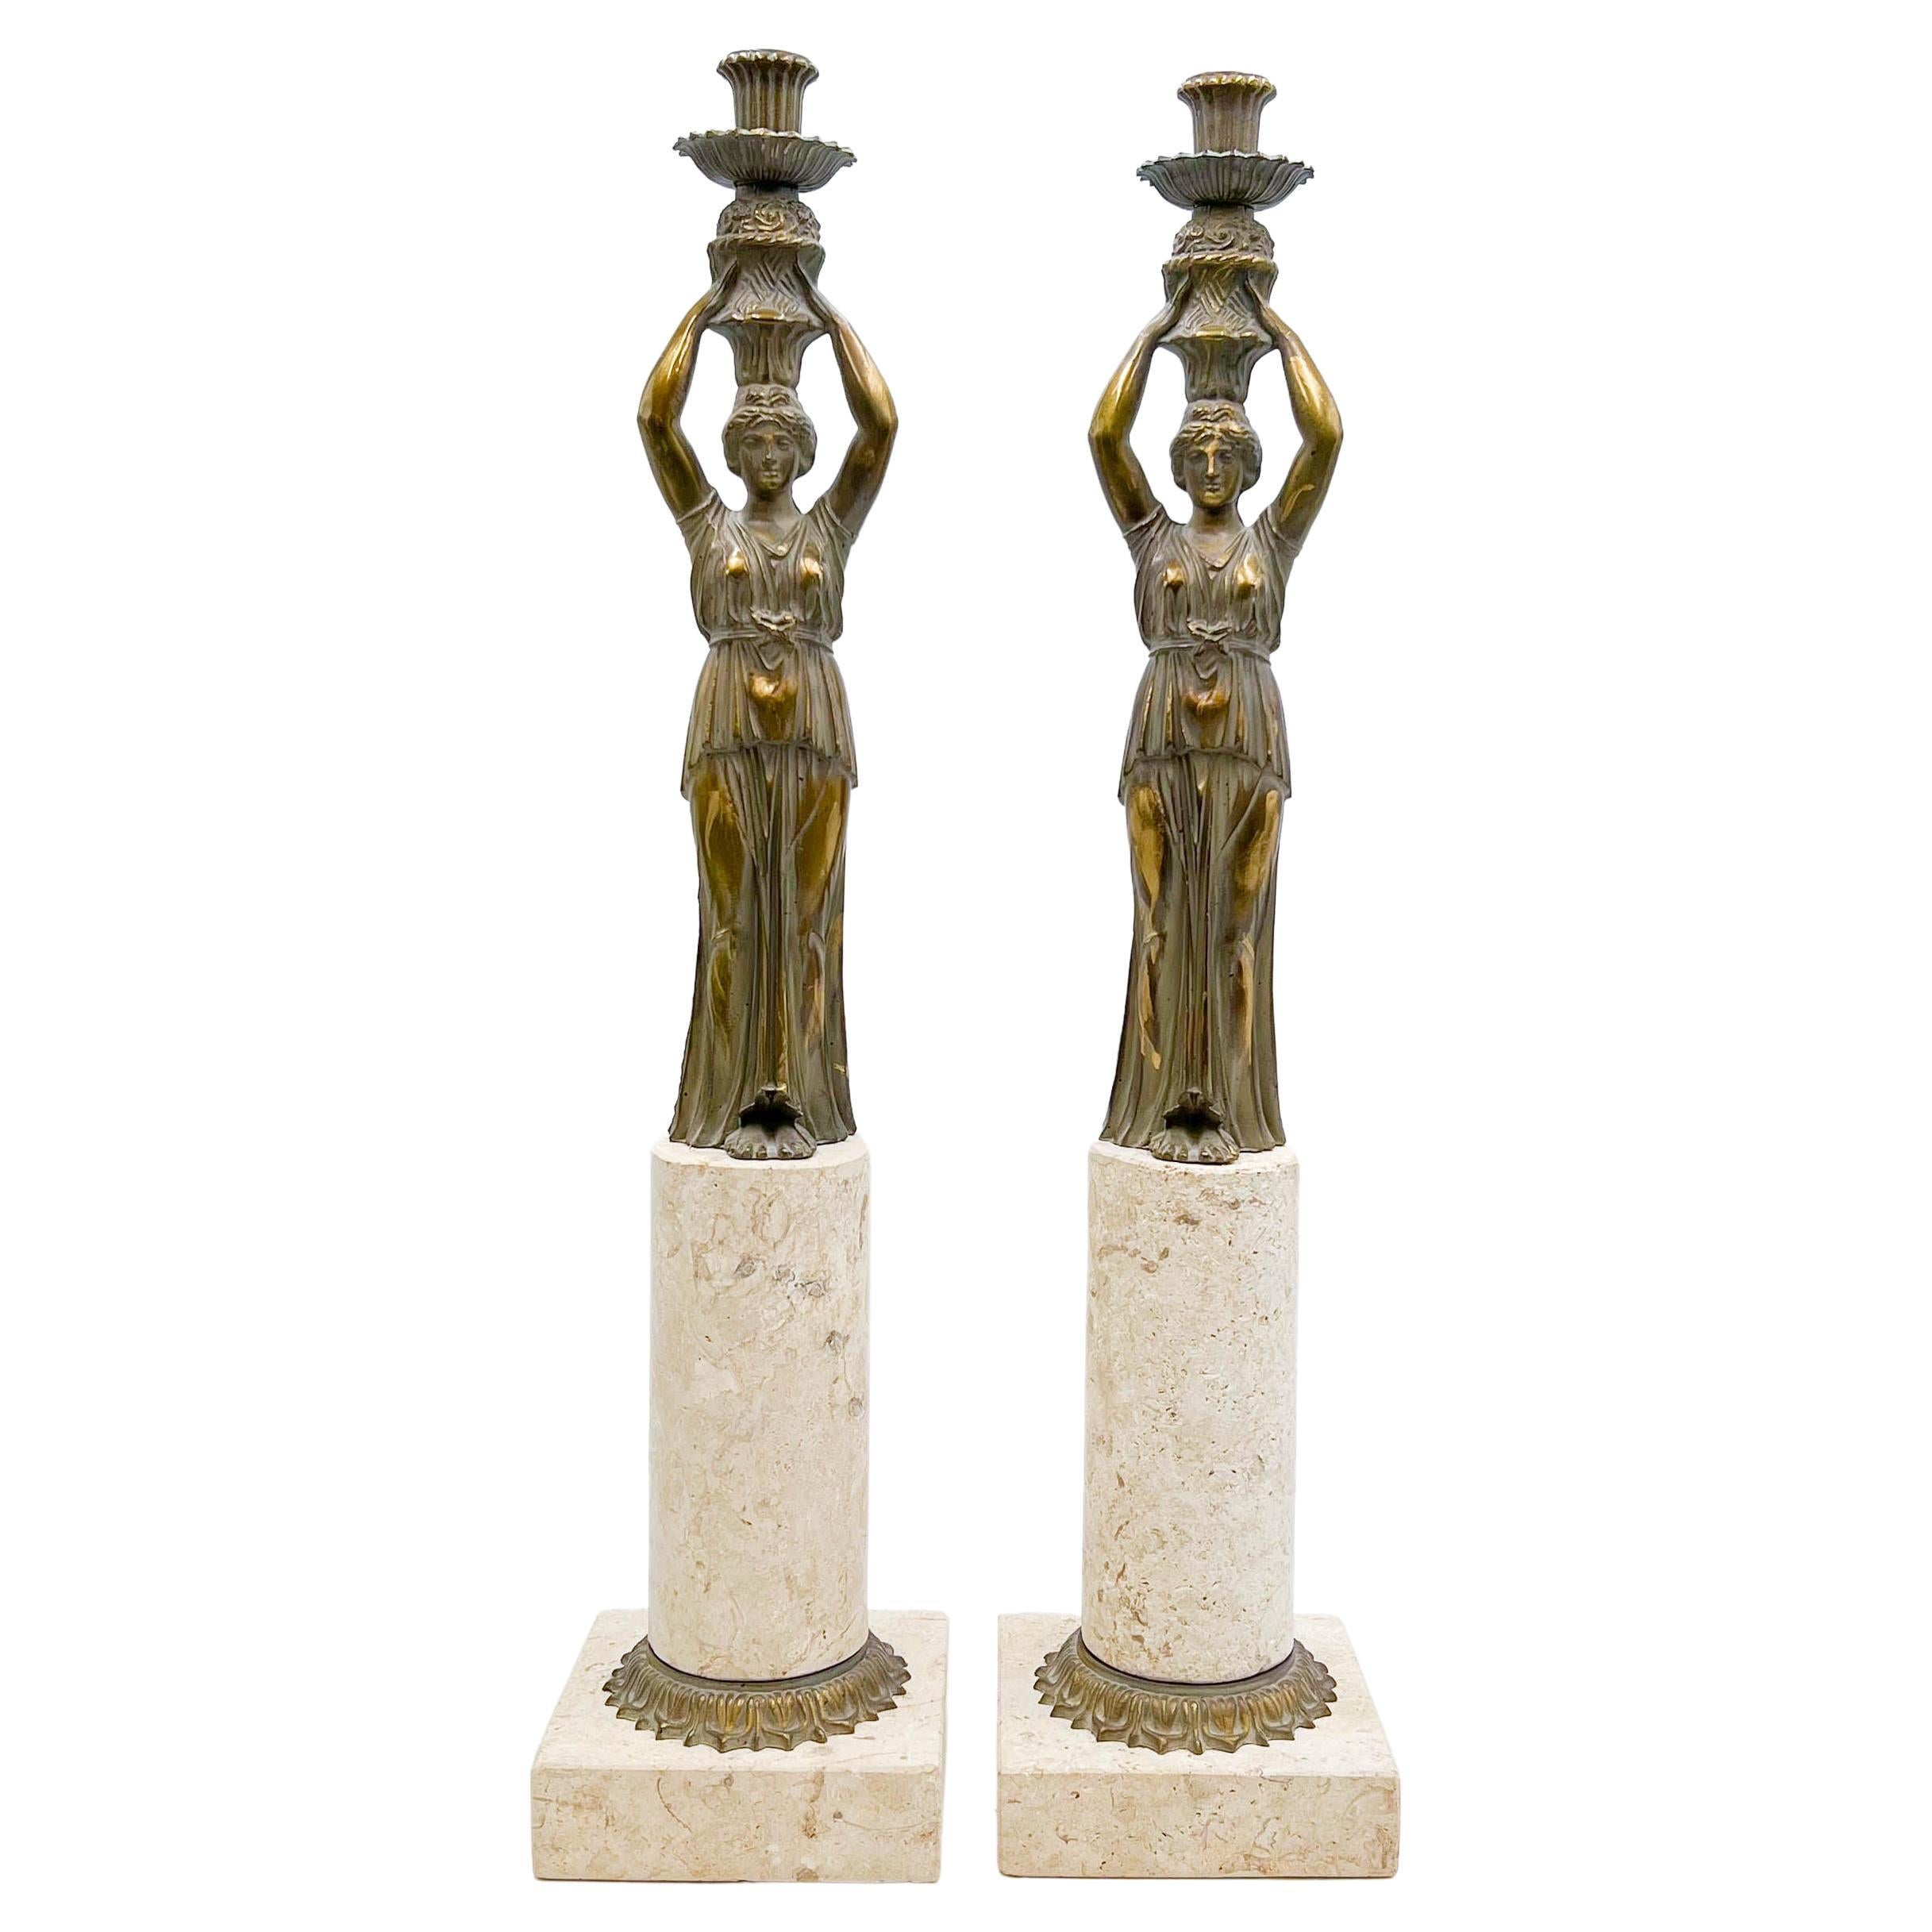 Pair of Neoclassical Candleholders